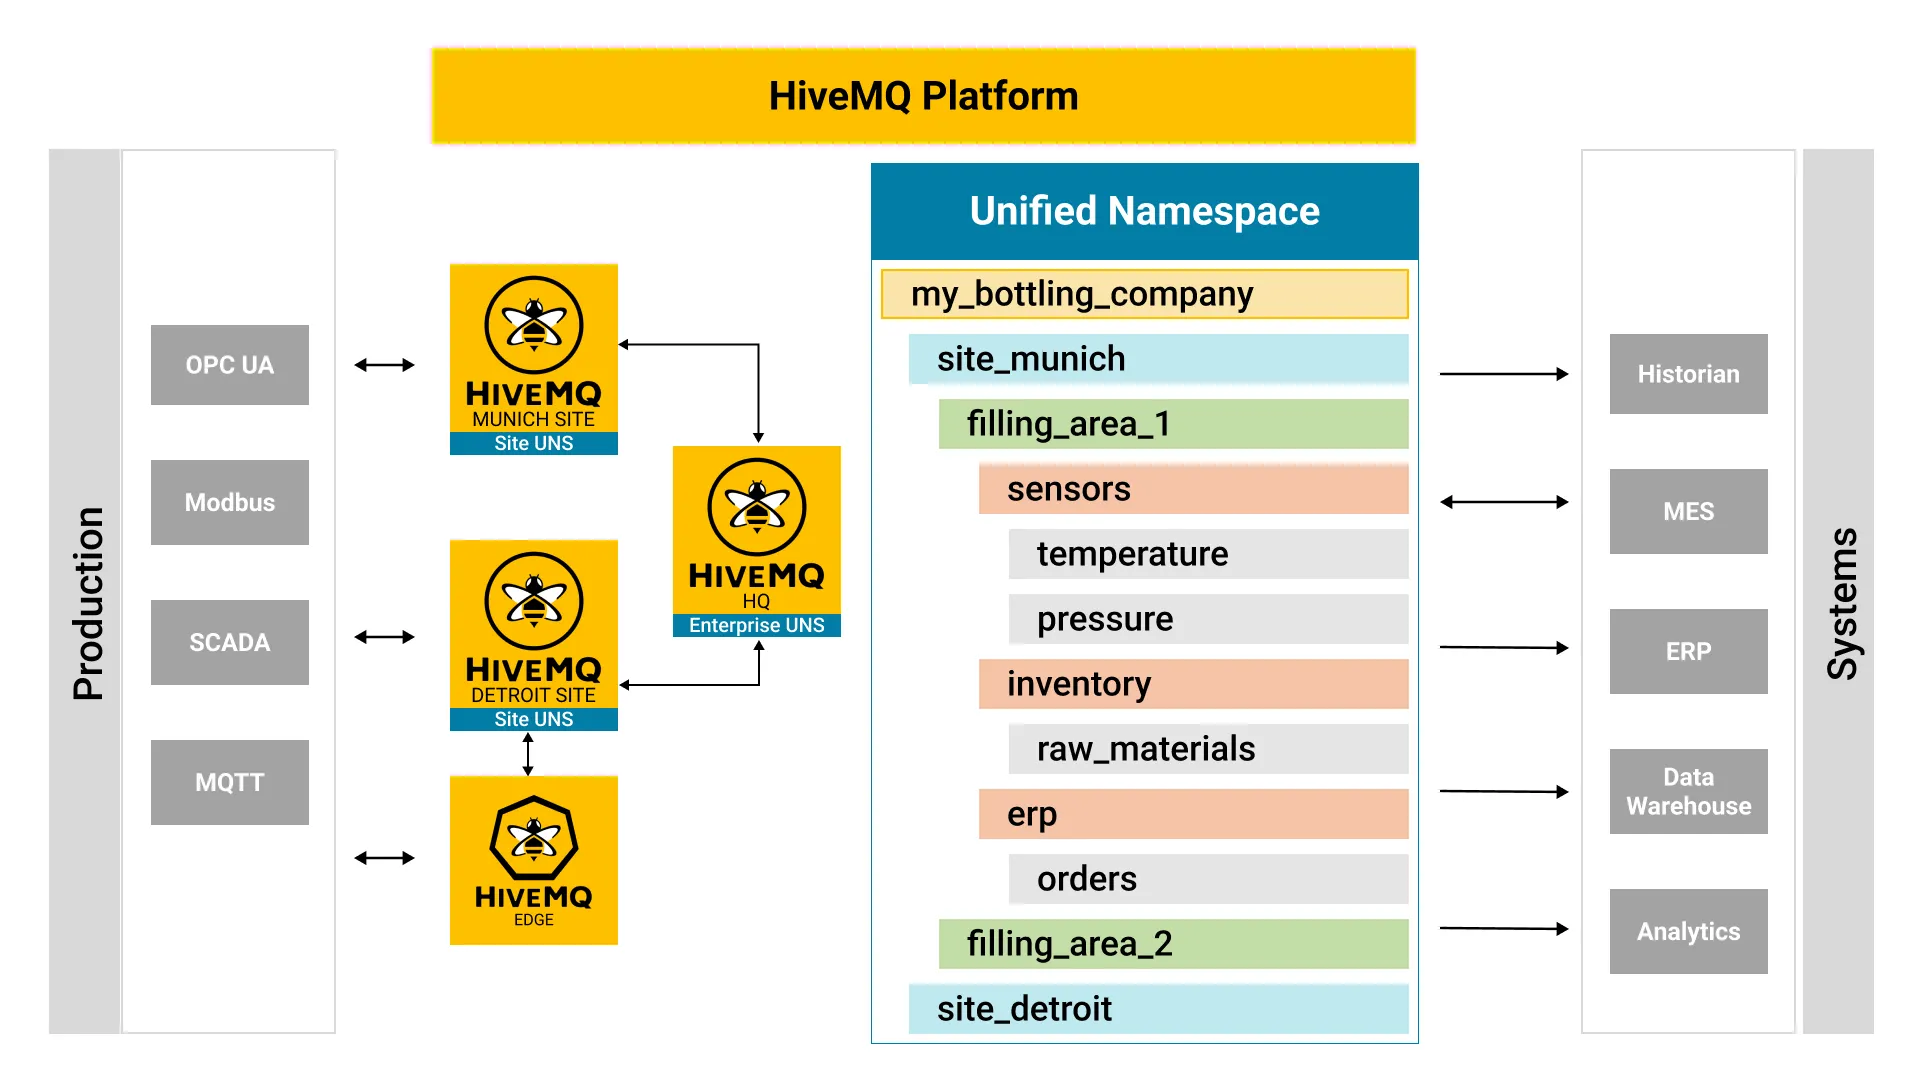 Unified Namespace Overview